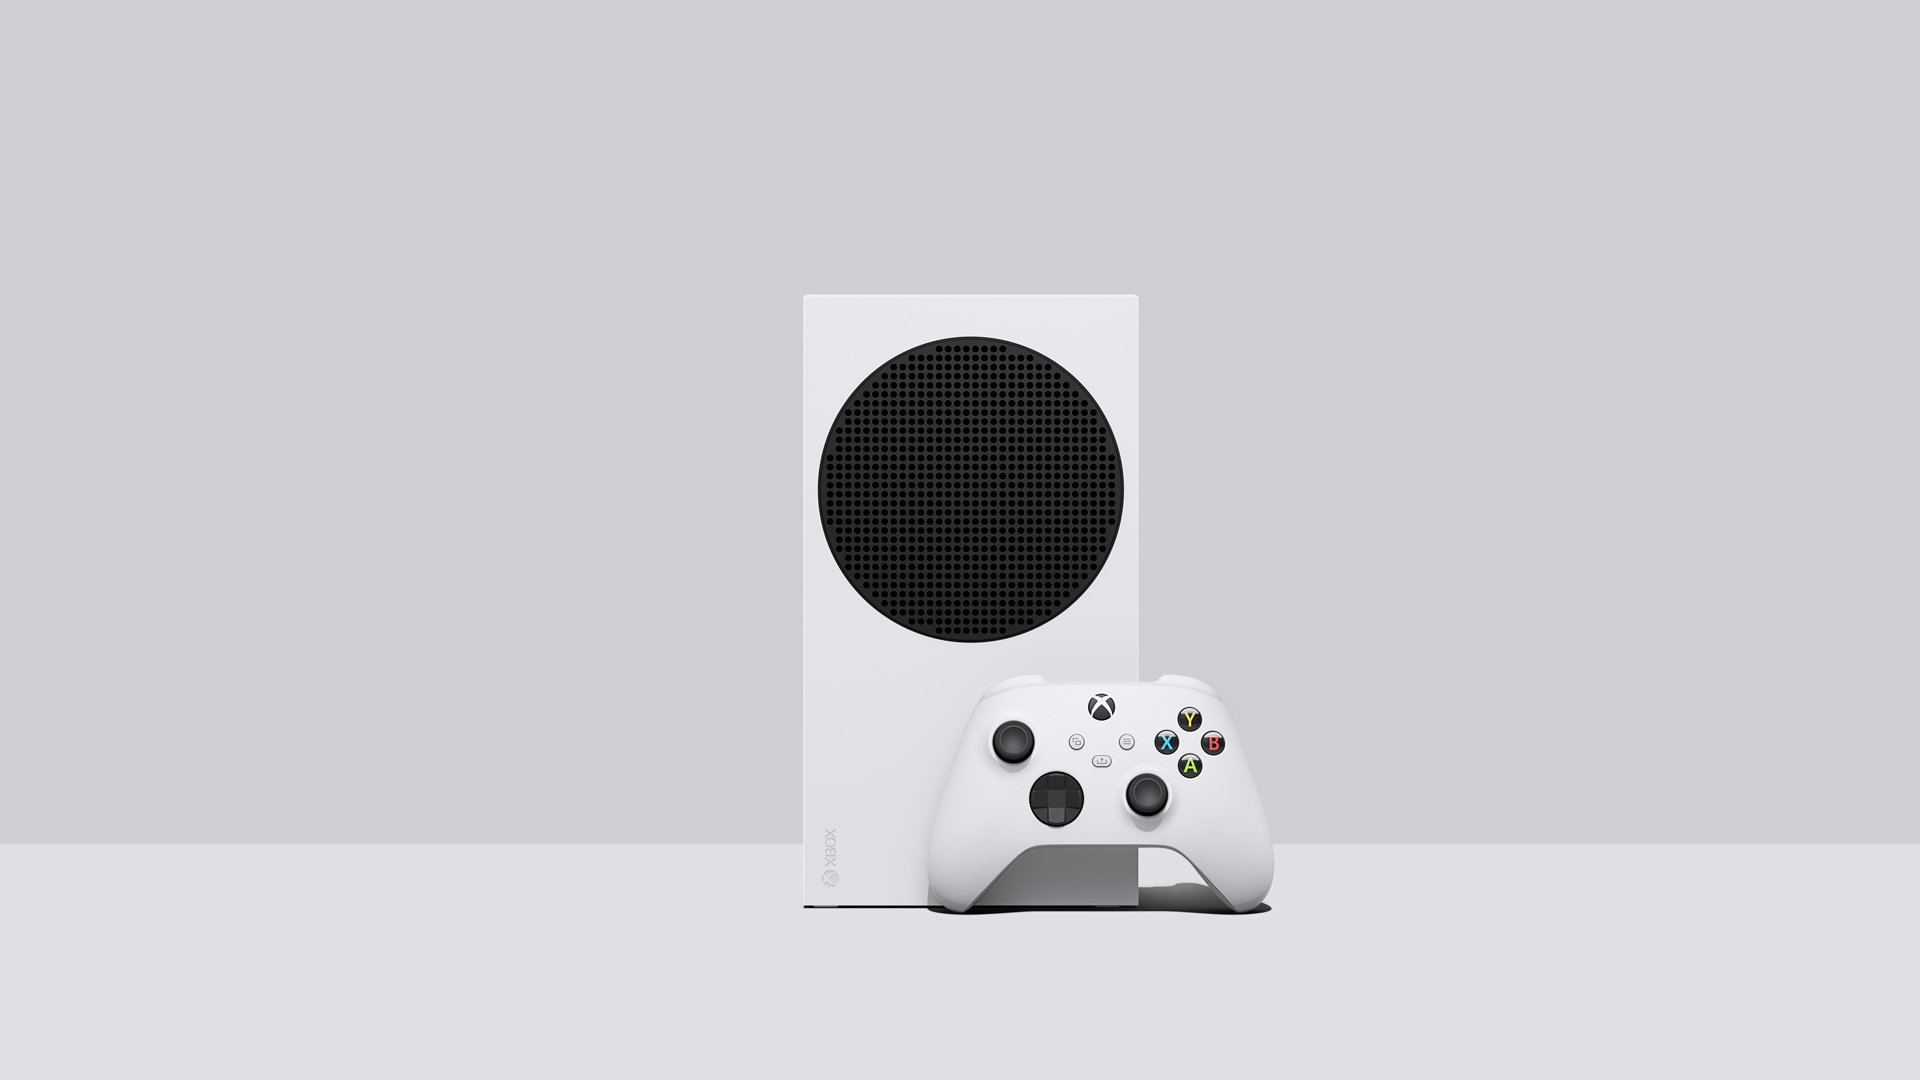 Xbox Series X and Xbox Series S: Designing the Next Generation of Consoles  - Xbox Wire